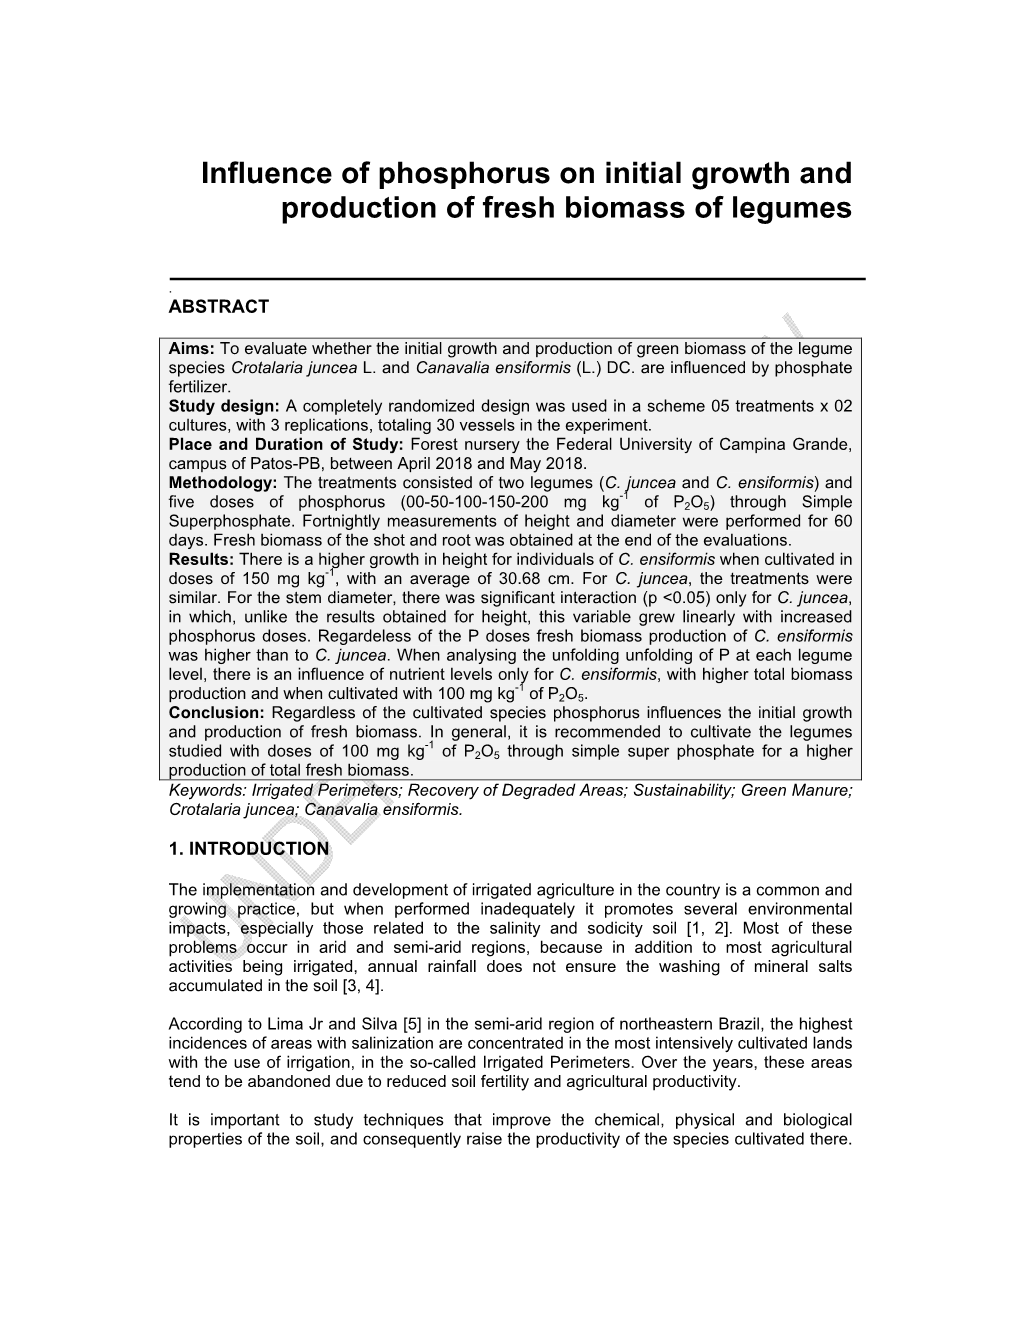 Influence of Phosphorus on Initial Growth and Production of Fresh Biomass of Legumes